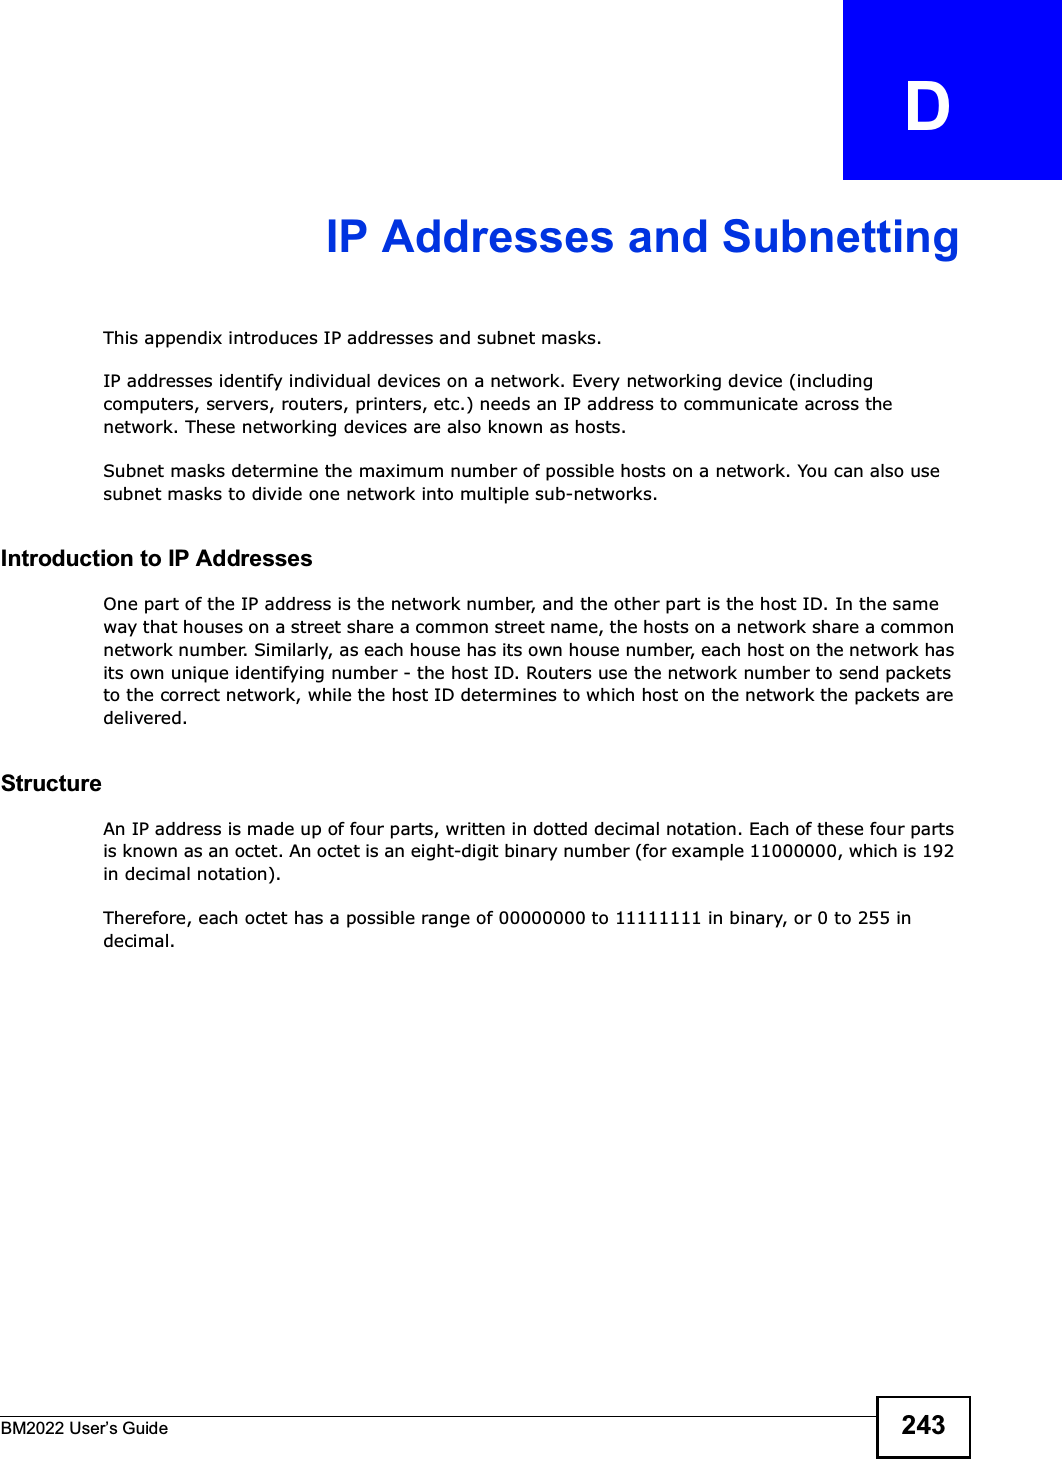 BM2022 Users Guide 243APPENDIX   DIP Addresses and SubnettingThis appendix introduces IP addresses and subnet masks. IP addresses identify individual devices on a network. Every networking device (including computers, servers, routers, printers, etc.) needs an IP address to communicate across the network. These networking devices are also known as hosts.Subnet masks determine the maximum number of possible hosts on a network. You can also use subnet masks to divide one network into multiple sub-networks.Introduction to IP AddressesOne part of the IP address is the network number, and the other part is the host ID. In the same way that houses on a street share a common street name, the hosts on a network share a common network number. Similarly, as each house has its own house number, each host on the network has its own unique identifying number - the host ID. Routers use the network number to send packets to the correct network, while the host ID determines to which host on the network the packets are delivered.StructureAn IP address is made up of four parts, written in dotted decimal notation. Each of these four parts is known as an octet. An octet is an eight-digit binary number (for example 11000000, which is 192 in decimal notation). Therefore, each octet has a possible range of 00000000 to 11111111 in binary, or 0 to 255 in decimal.